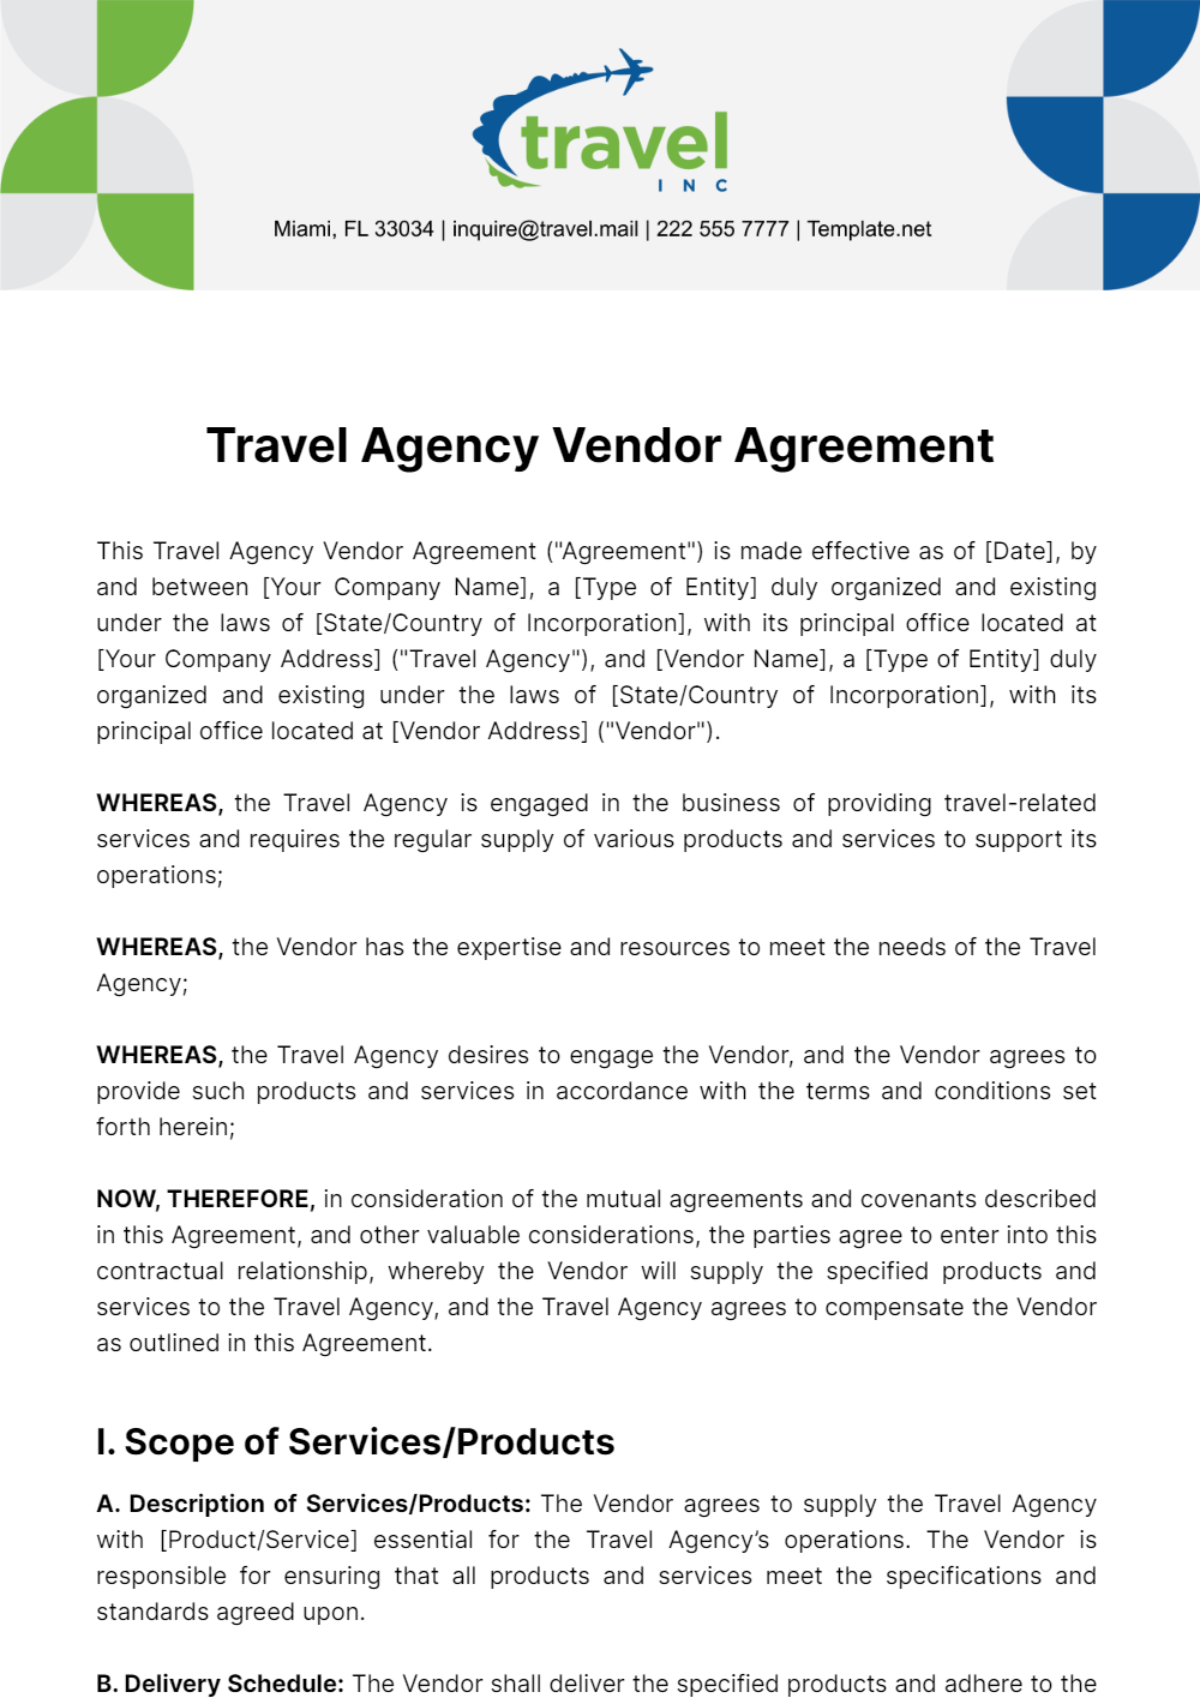 Free Travel Agency Vendor Agreement Template